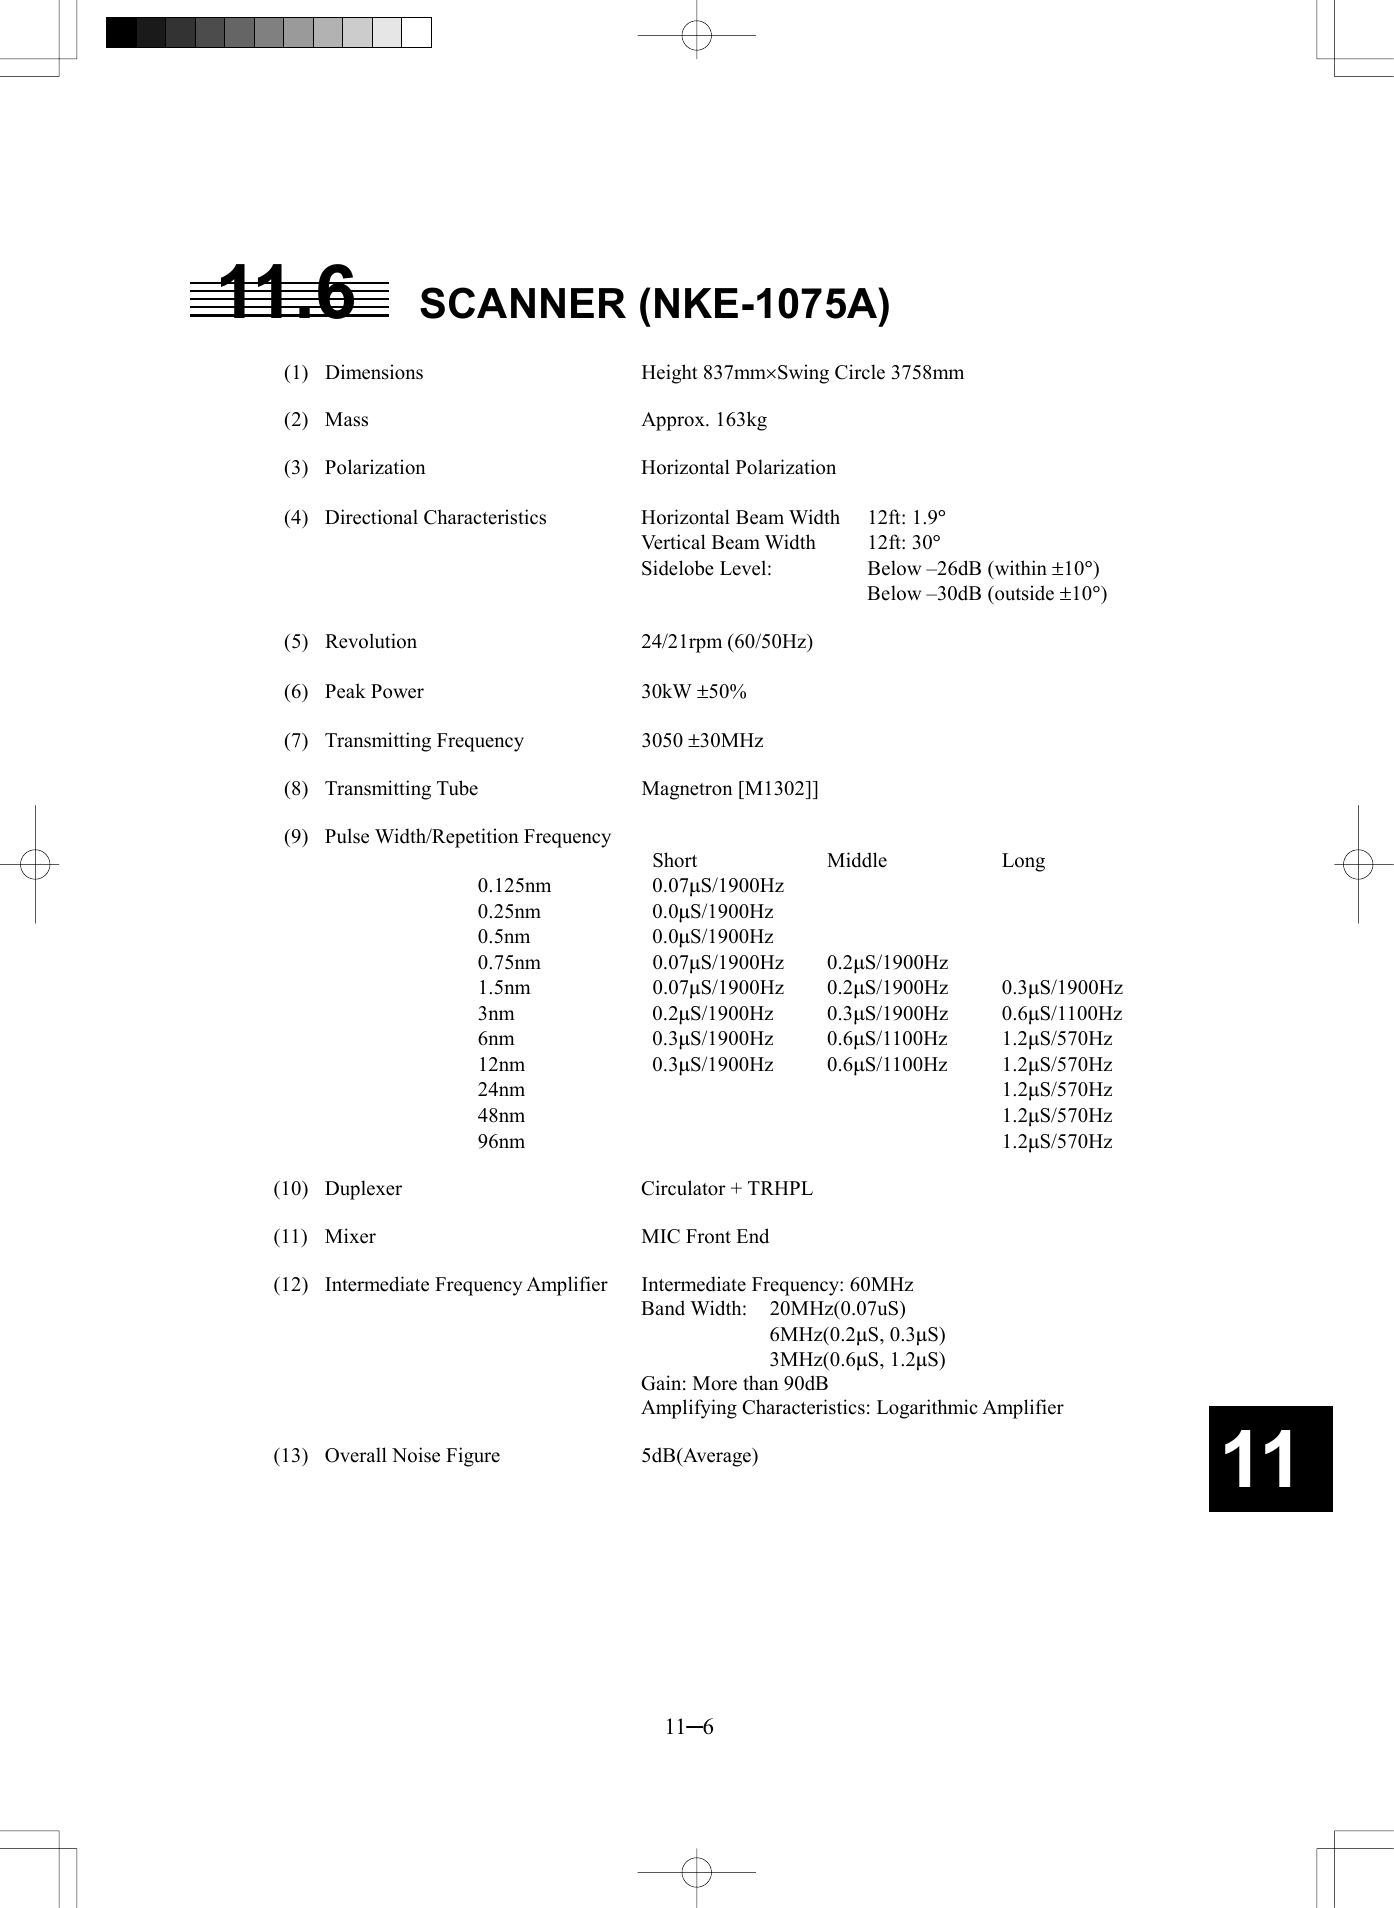   11─6 11 11.6 SCANNER (NKE-1075A)    (1)  Dimensions  Height 837mm´Swing Circle 3758mm   (2)  Mass  Approx. 163kg   (3)  Polarization  Horizontal Polarization   (4)  Directional Characteristics  Horizontal Beam Width  12ft: 1.9° Vertical Beam Width  12ft: 30°     Sidelobe Level:    Below –26dB (within ±10°)       Below –30dB (outside ±10°)   (5)  Revolution  24/21rpm (60/50Hz)   (6)  Peak Power  30kW ±50%   (7)  Transmitting Frequency  3050 ±30MHz   (8)  Transmitting Tube  Magnetron [M1302]]   (9)  Pulse Width/Repetition Frequency      Short  Middle  Long 0.125nm   0.07mS/1900Hz 0.25nm   0.0mS/1900Hz 0.5nm   0.0mS/1900Hz 0.75nm   0.07mS/1900Hz 0.2mS/1900Hz 1.5nm   0.07mS/1900Hz 0.2mS/1900Hz 0.3mS/1900Hz 3nm   0.2mS/1900Hz 0.3mS/1900Hz 0.6mS/1100Hz 6nm   0.3mS/1900Hz 0.6mS/1100Hz 1.2mS/570Hz 12nm   0.3mS/1900Hz 0.6mS/1100Hz 1.2mS/570Hz 24nm      1.2mS/570Hz 48nm      1.2mS/570Hz 96nm      1.2mS/570Hz  (10) Duplexer  Circulator + TRHPL  (11)  Mixer  MIC Front End  (12)  Intermediate Frequency Amplifier  Intermediate Frequency: 60MHz    Band Width: 20MHz(0.07uS)      6MHz(0.2mS, 0.3mS)      3MHz(0.6mS, 1.2mS)     Gain: More than 90dB     Amplifying Characteristics: Logarithmic Amplifier  (13)  Overall Noise Figure  5dB(Average)   